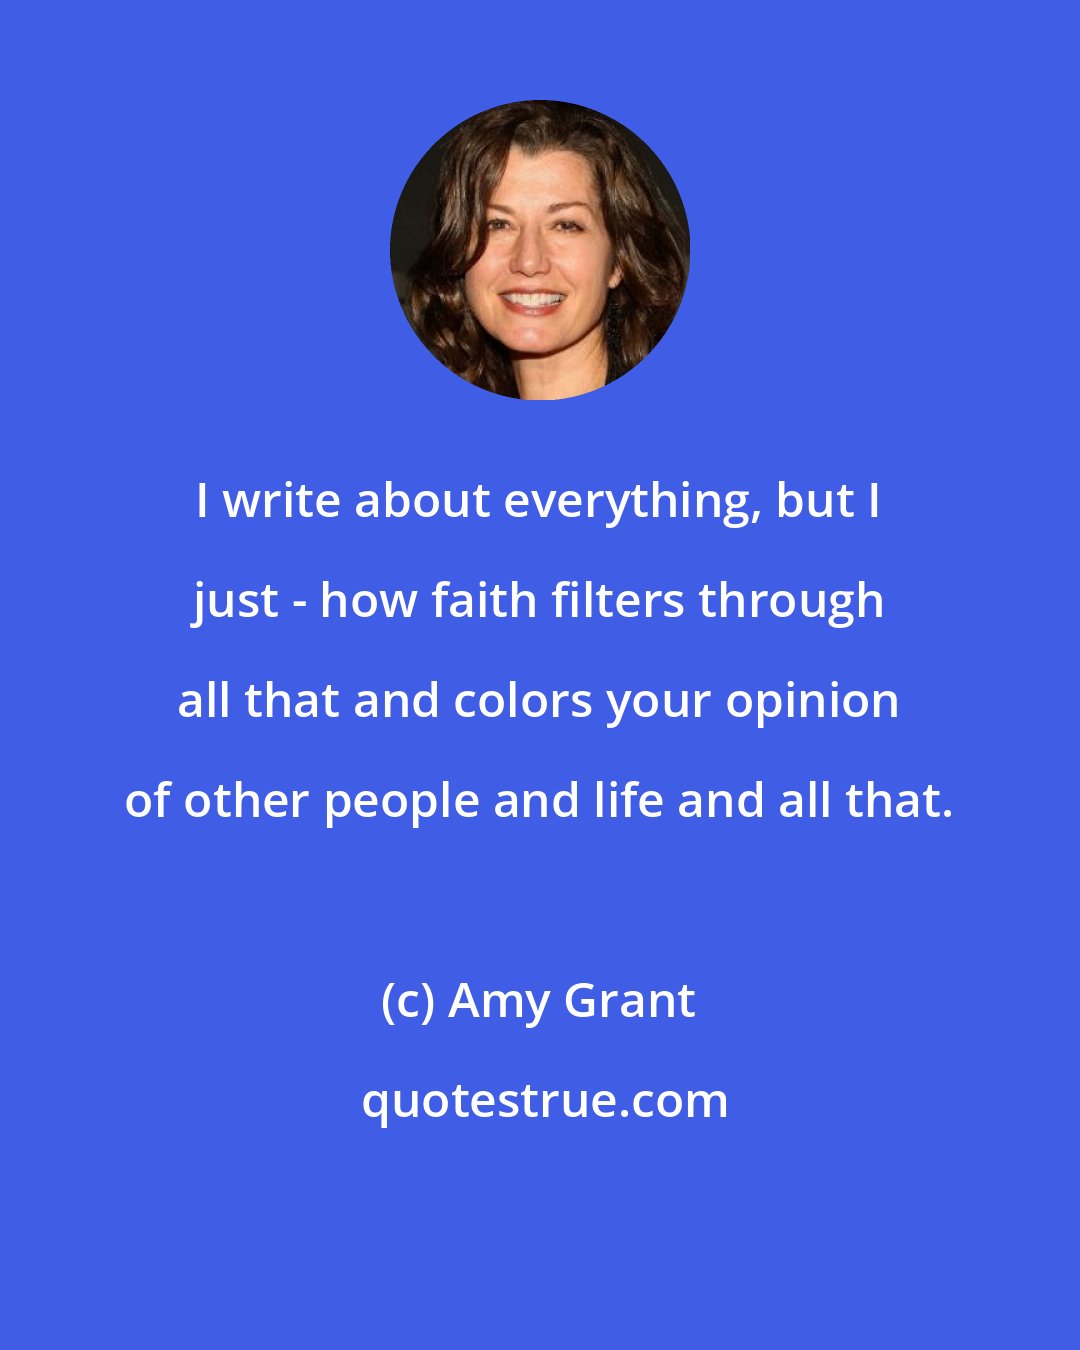 Amy Grant: I write about everything, but I just - how faith filters through all that and colors your opinion of other people and life and all that.